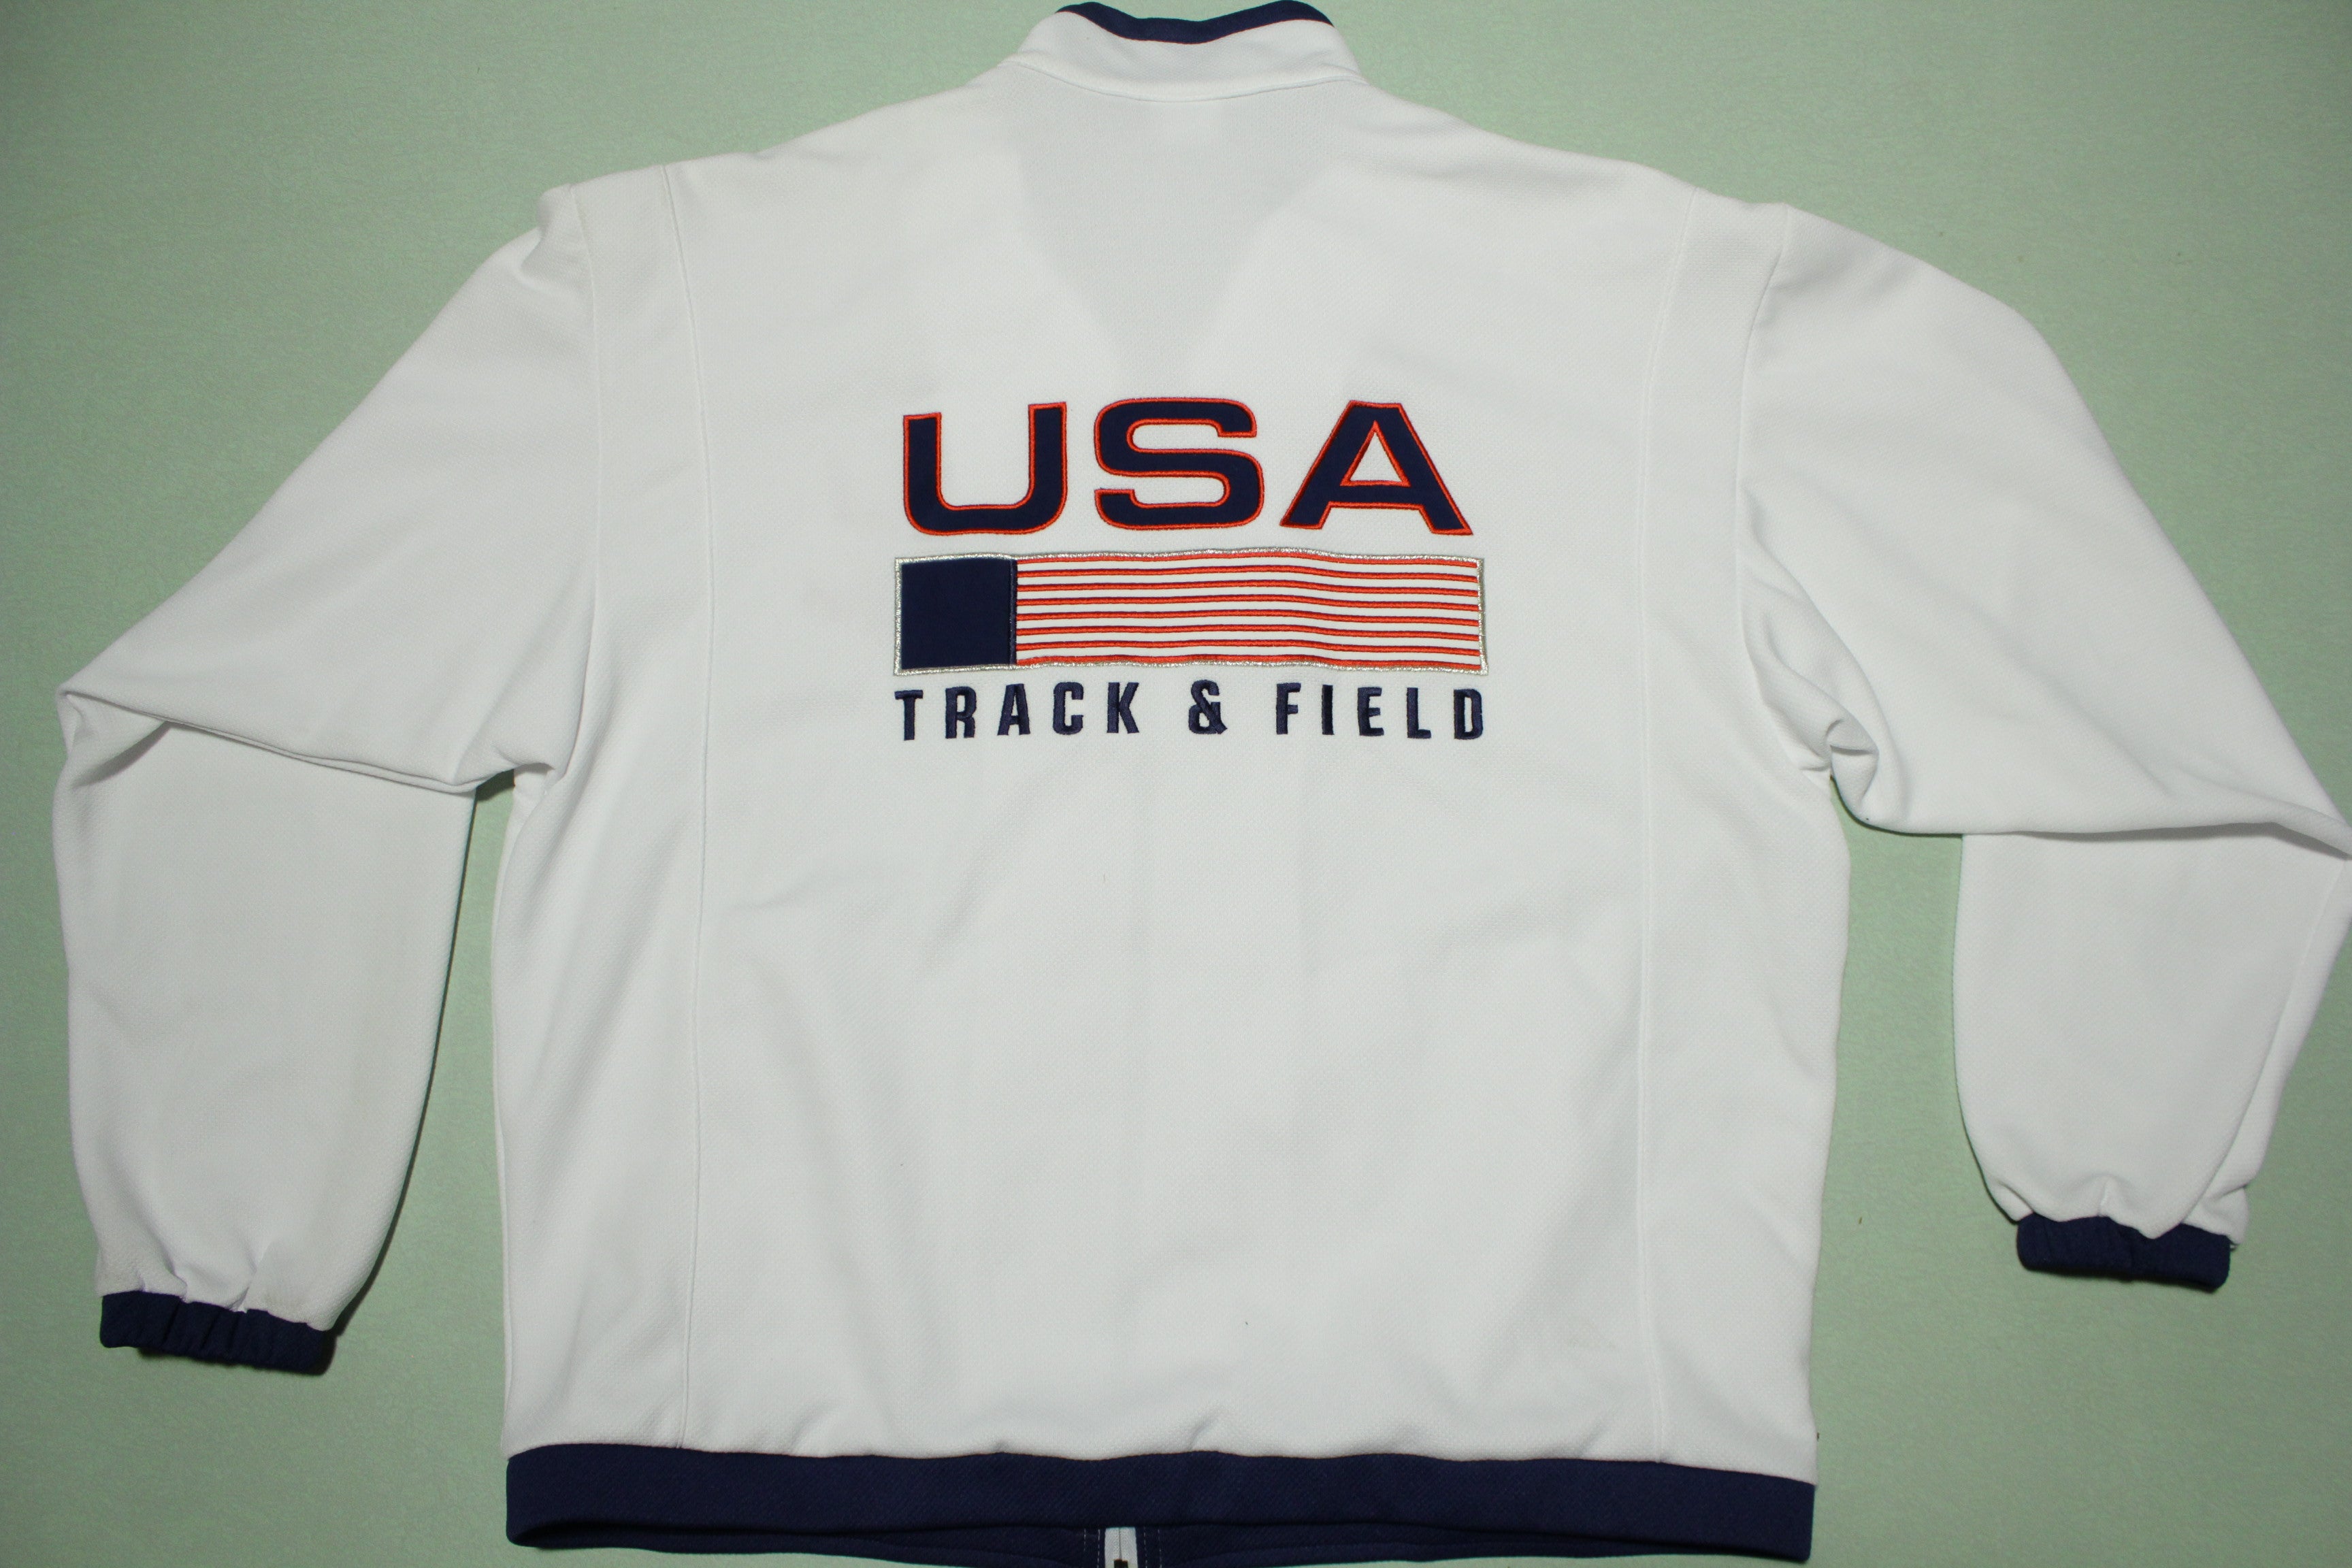 USA Track & Field Vintage 90s Nike Deadstock NWOT Olympic White 